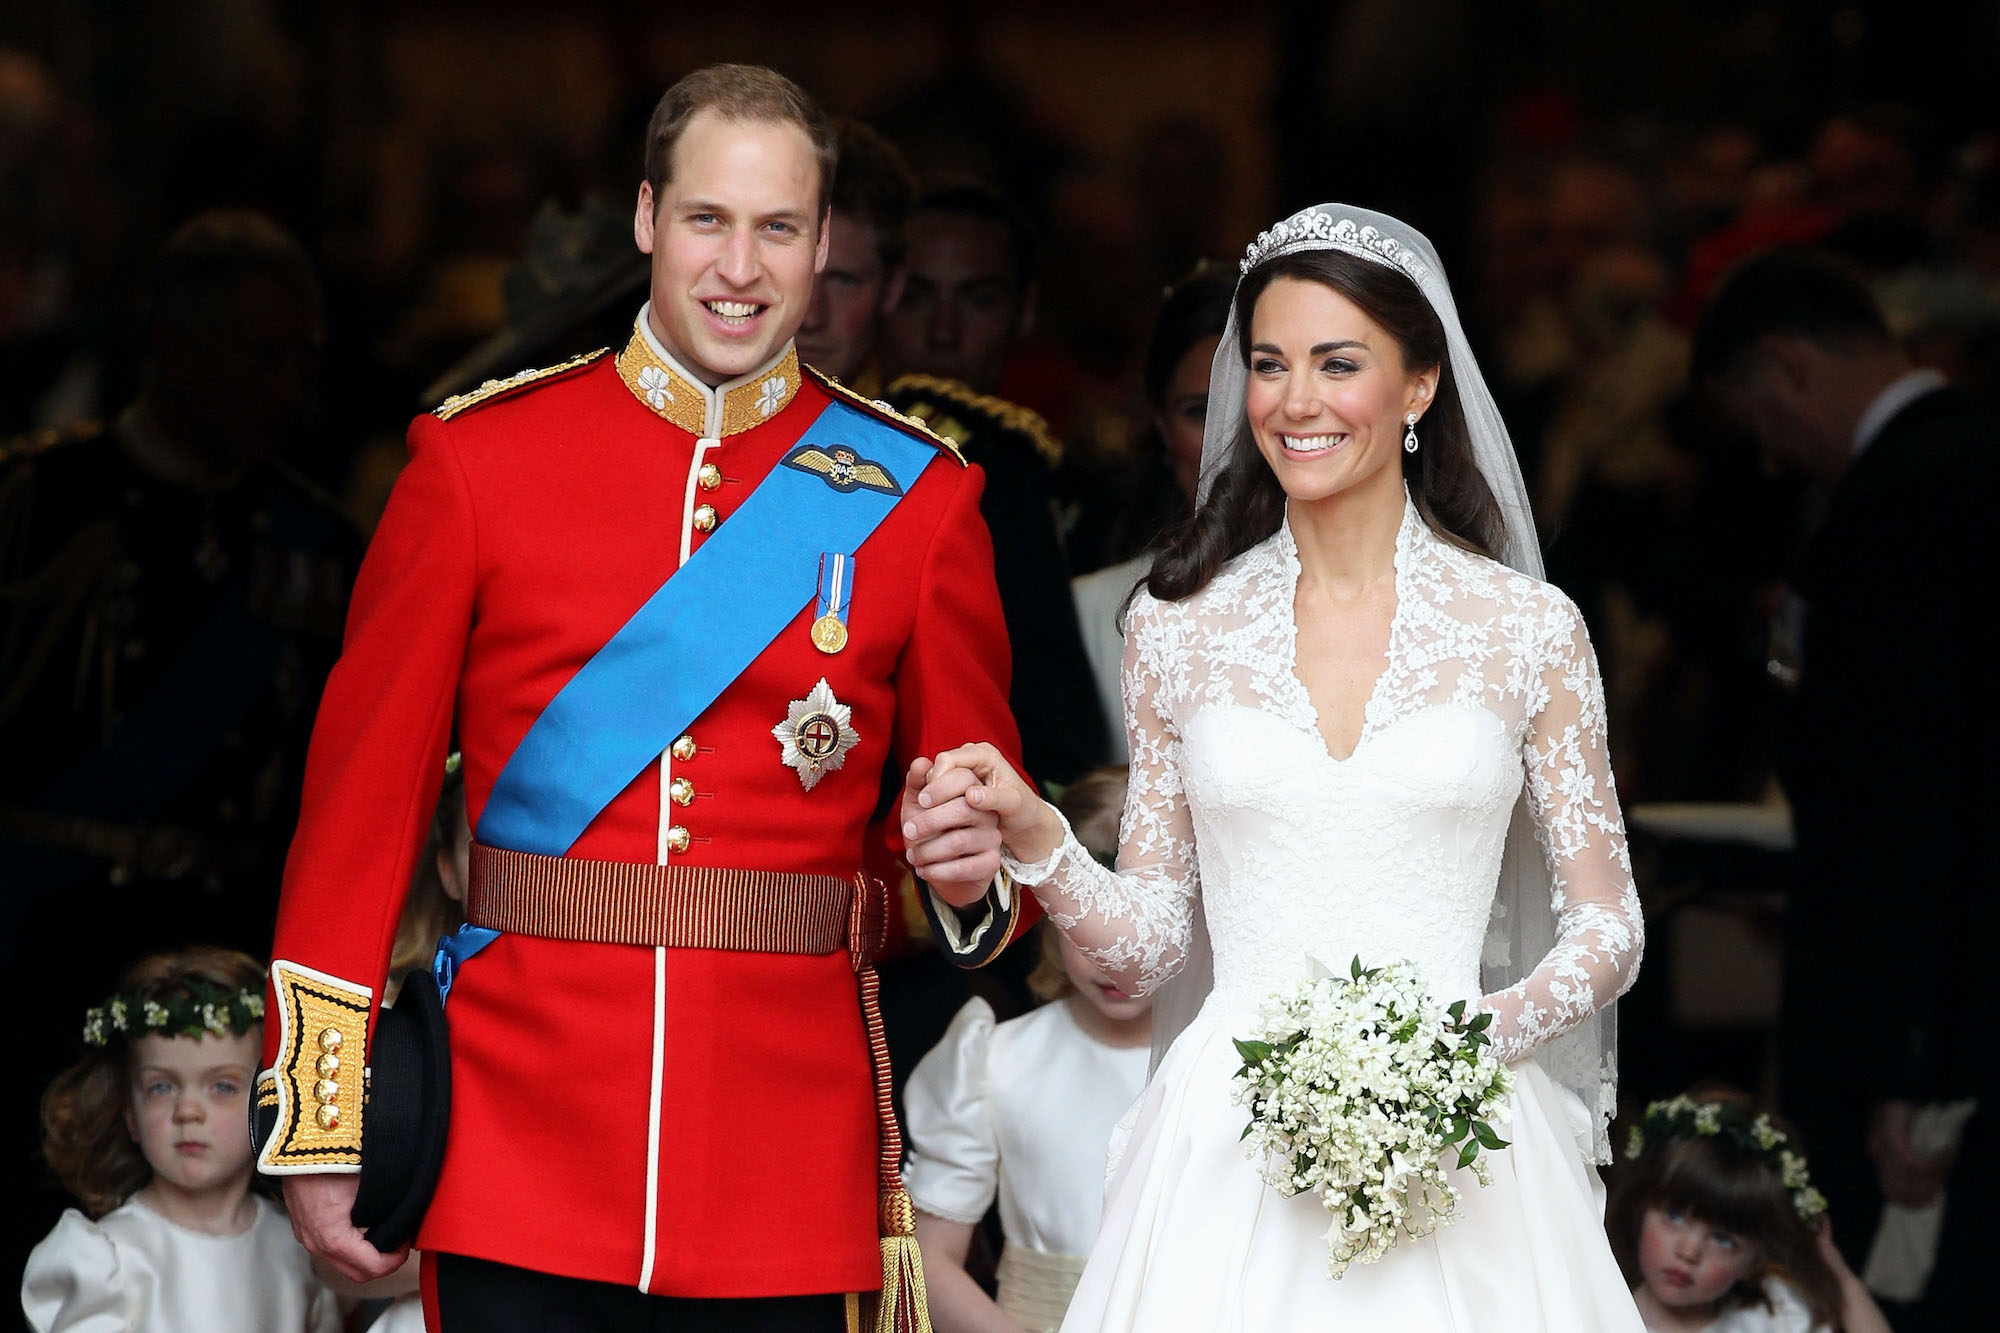 Prince William and Kate Middleton at their royal wedding